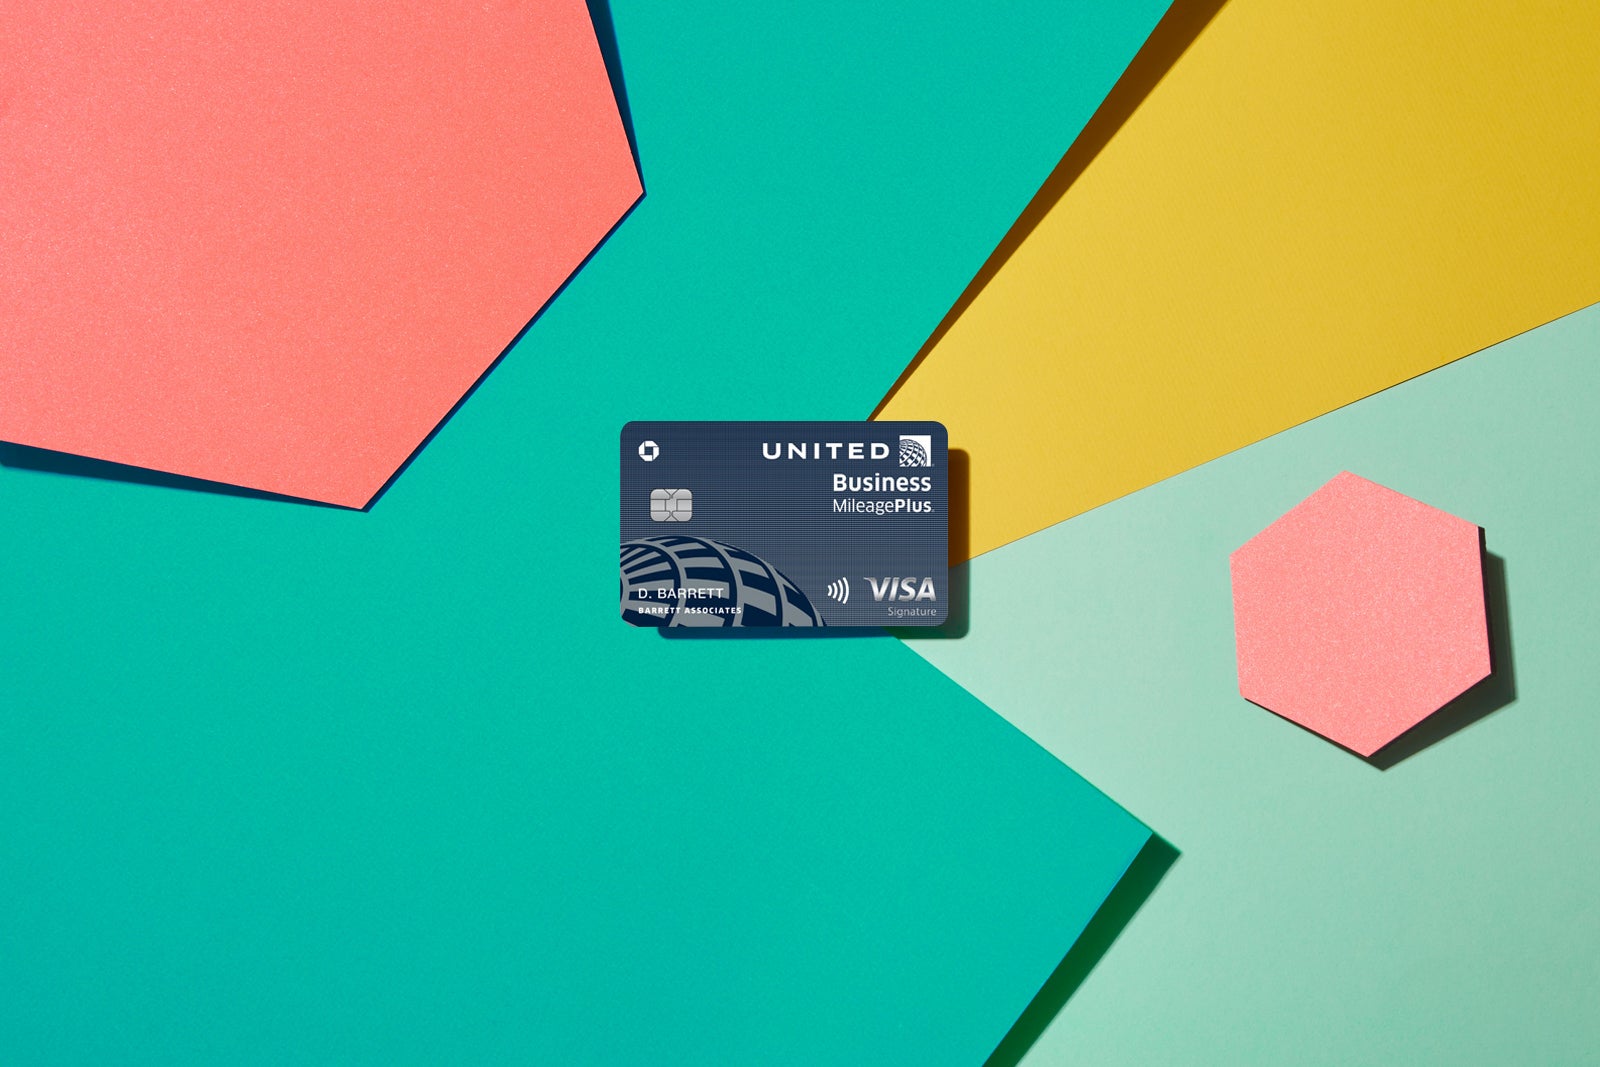 Earn Up To 75 000 Miles With These New United Credit Card Offers The Points Guy